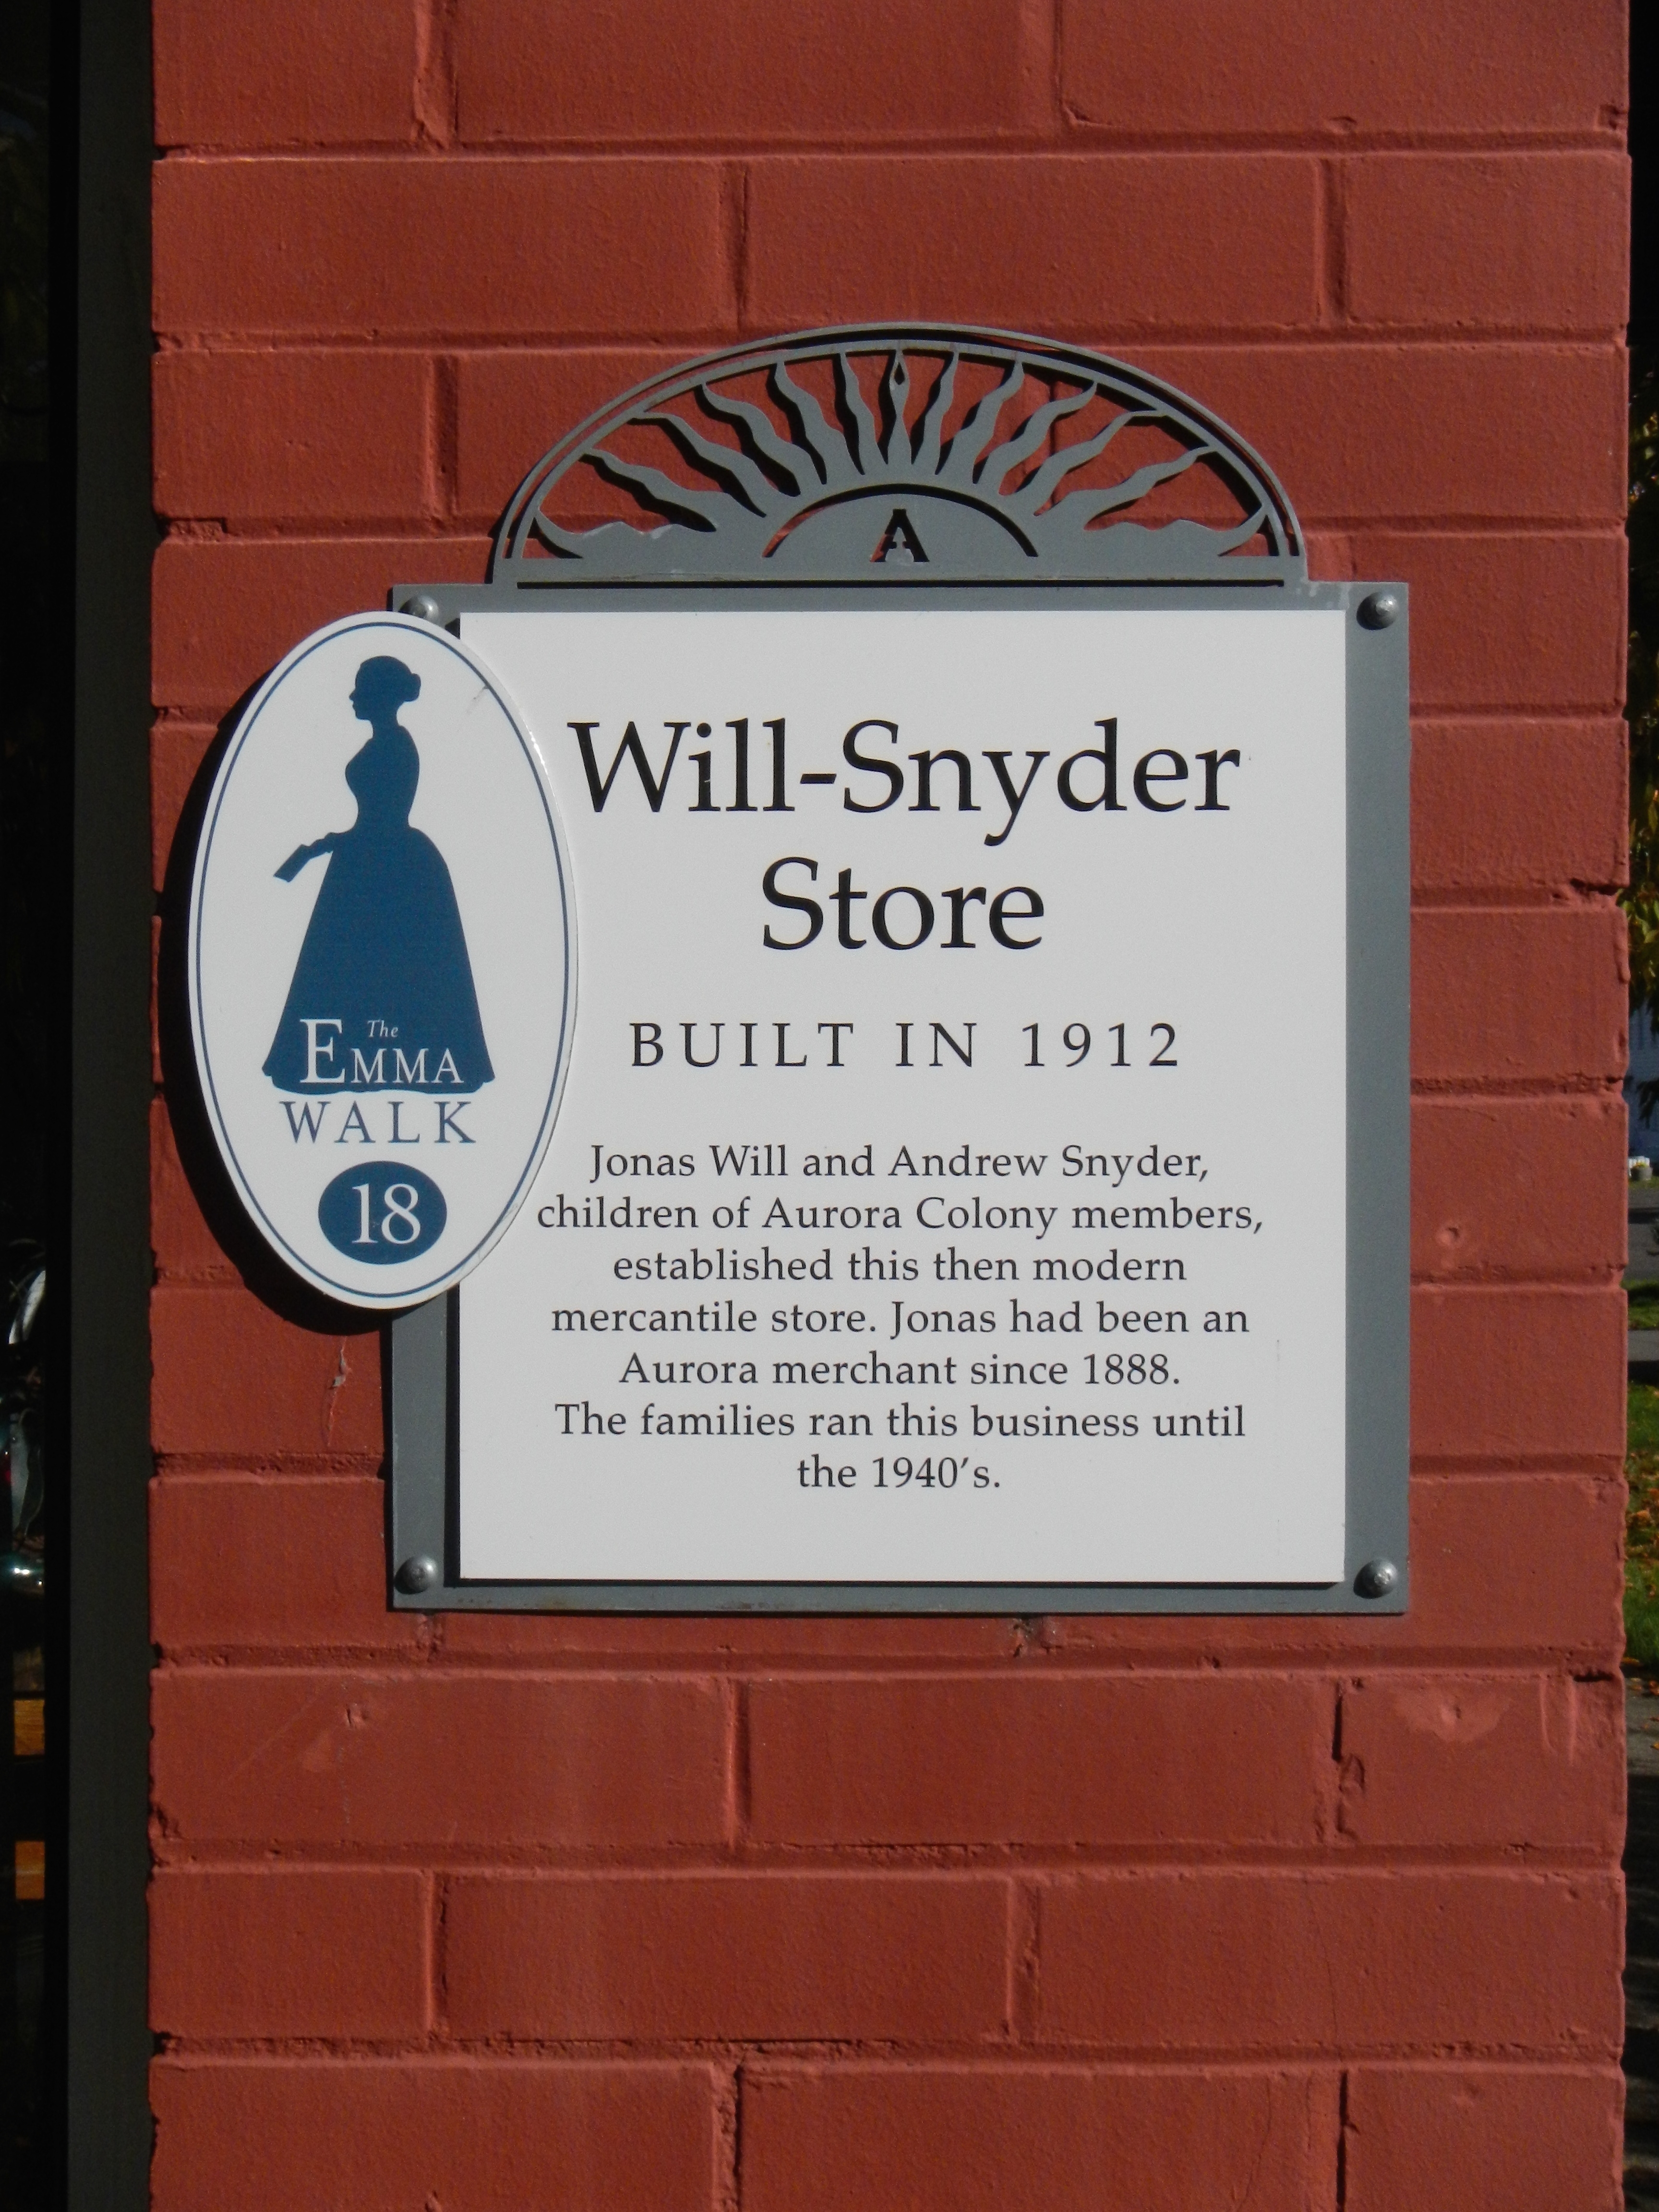 Will-Snyder Store Marker